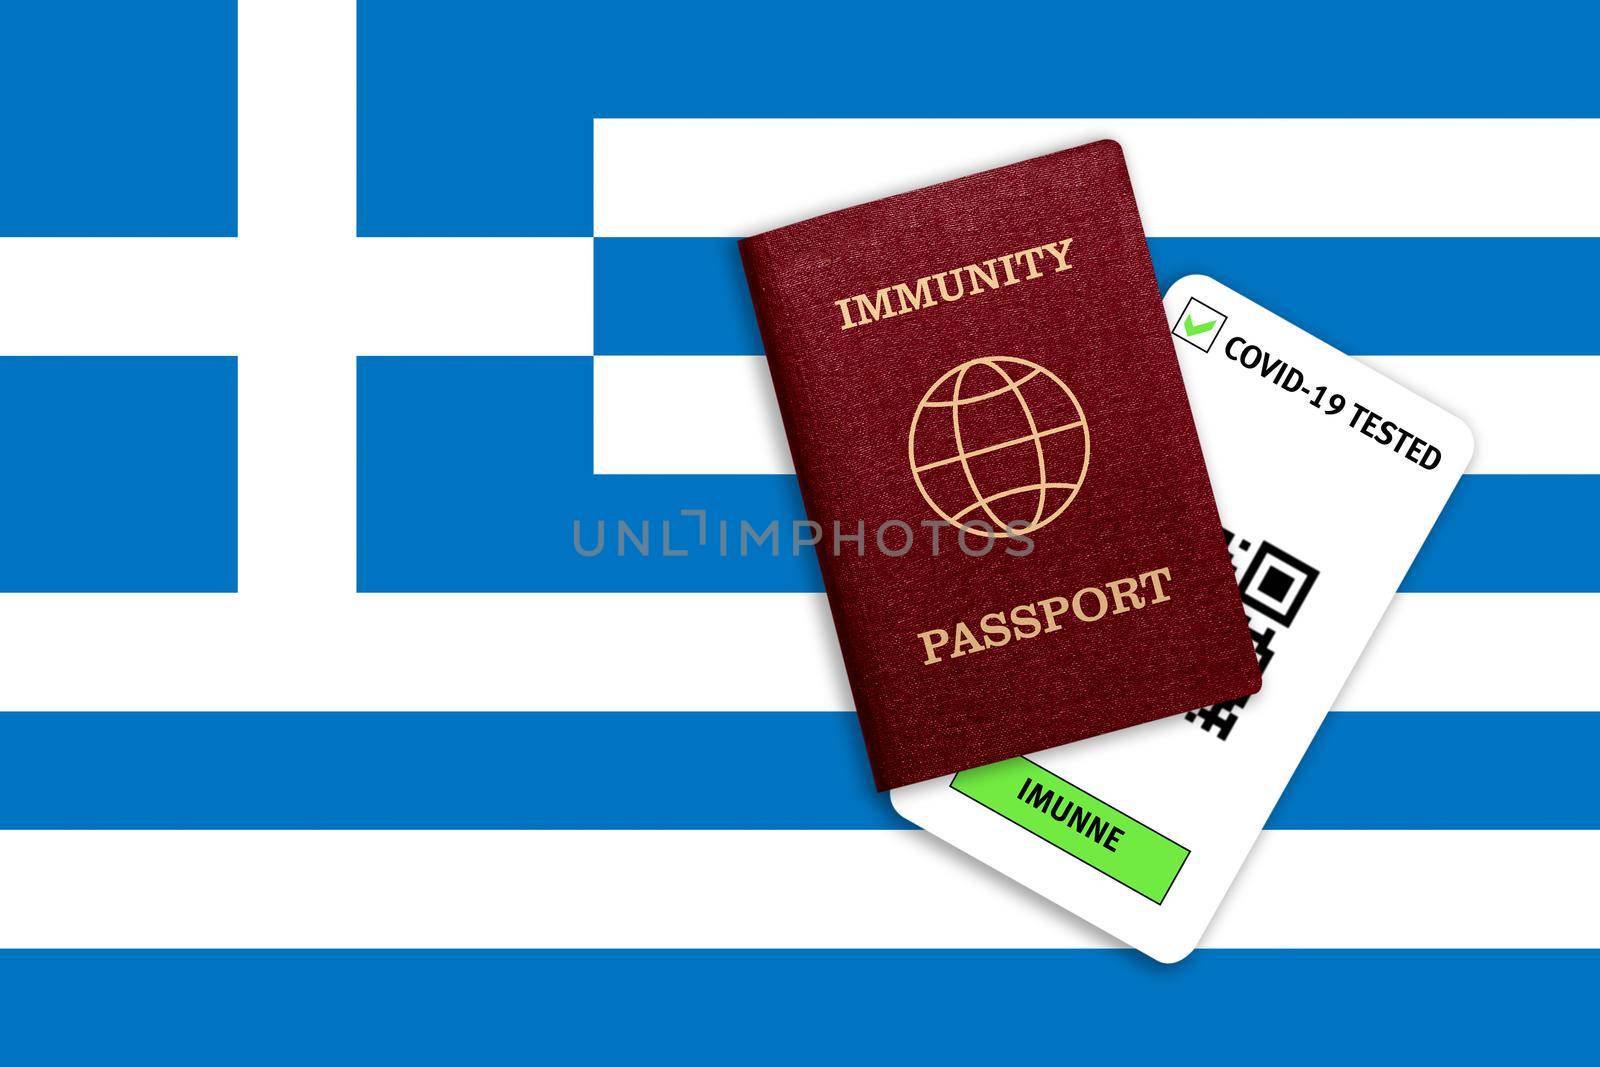 Concept of immunity to coronavirus. Immunity passport and test result for COVID-19 on flag of Greece. Vaccination passport against covid-19 that allows you travel around the world.